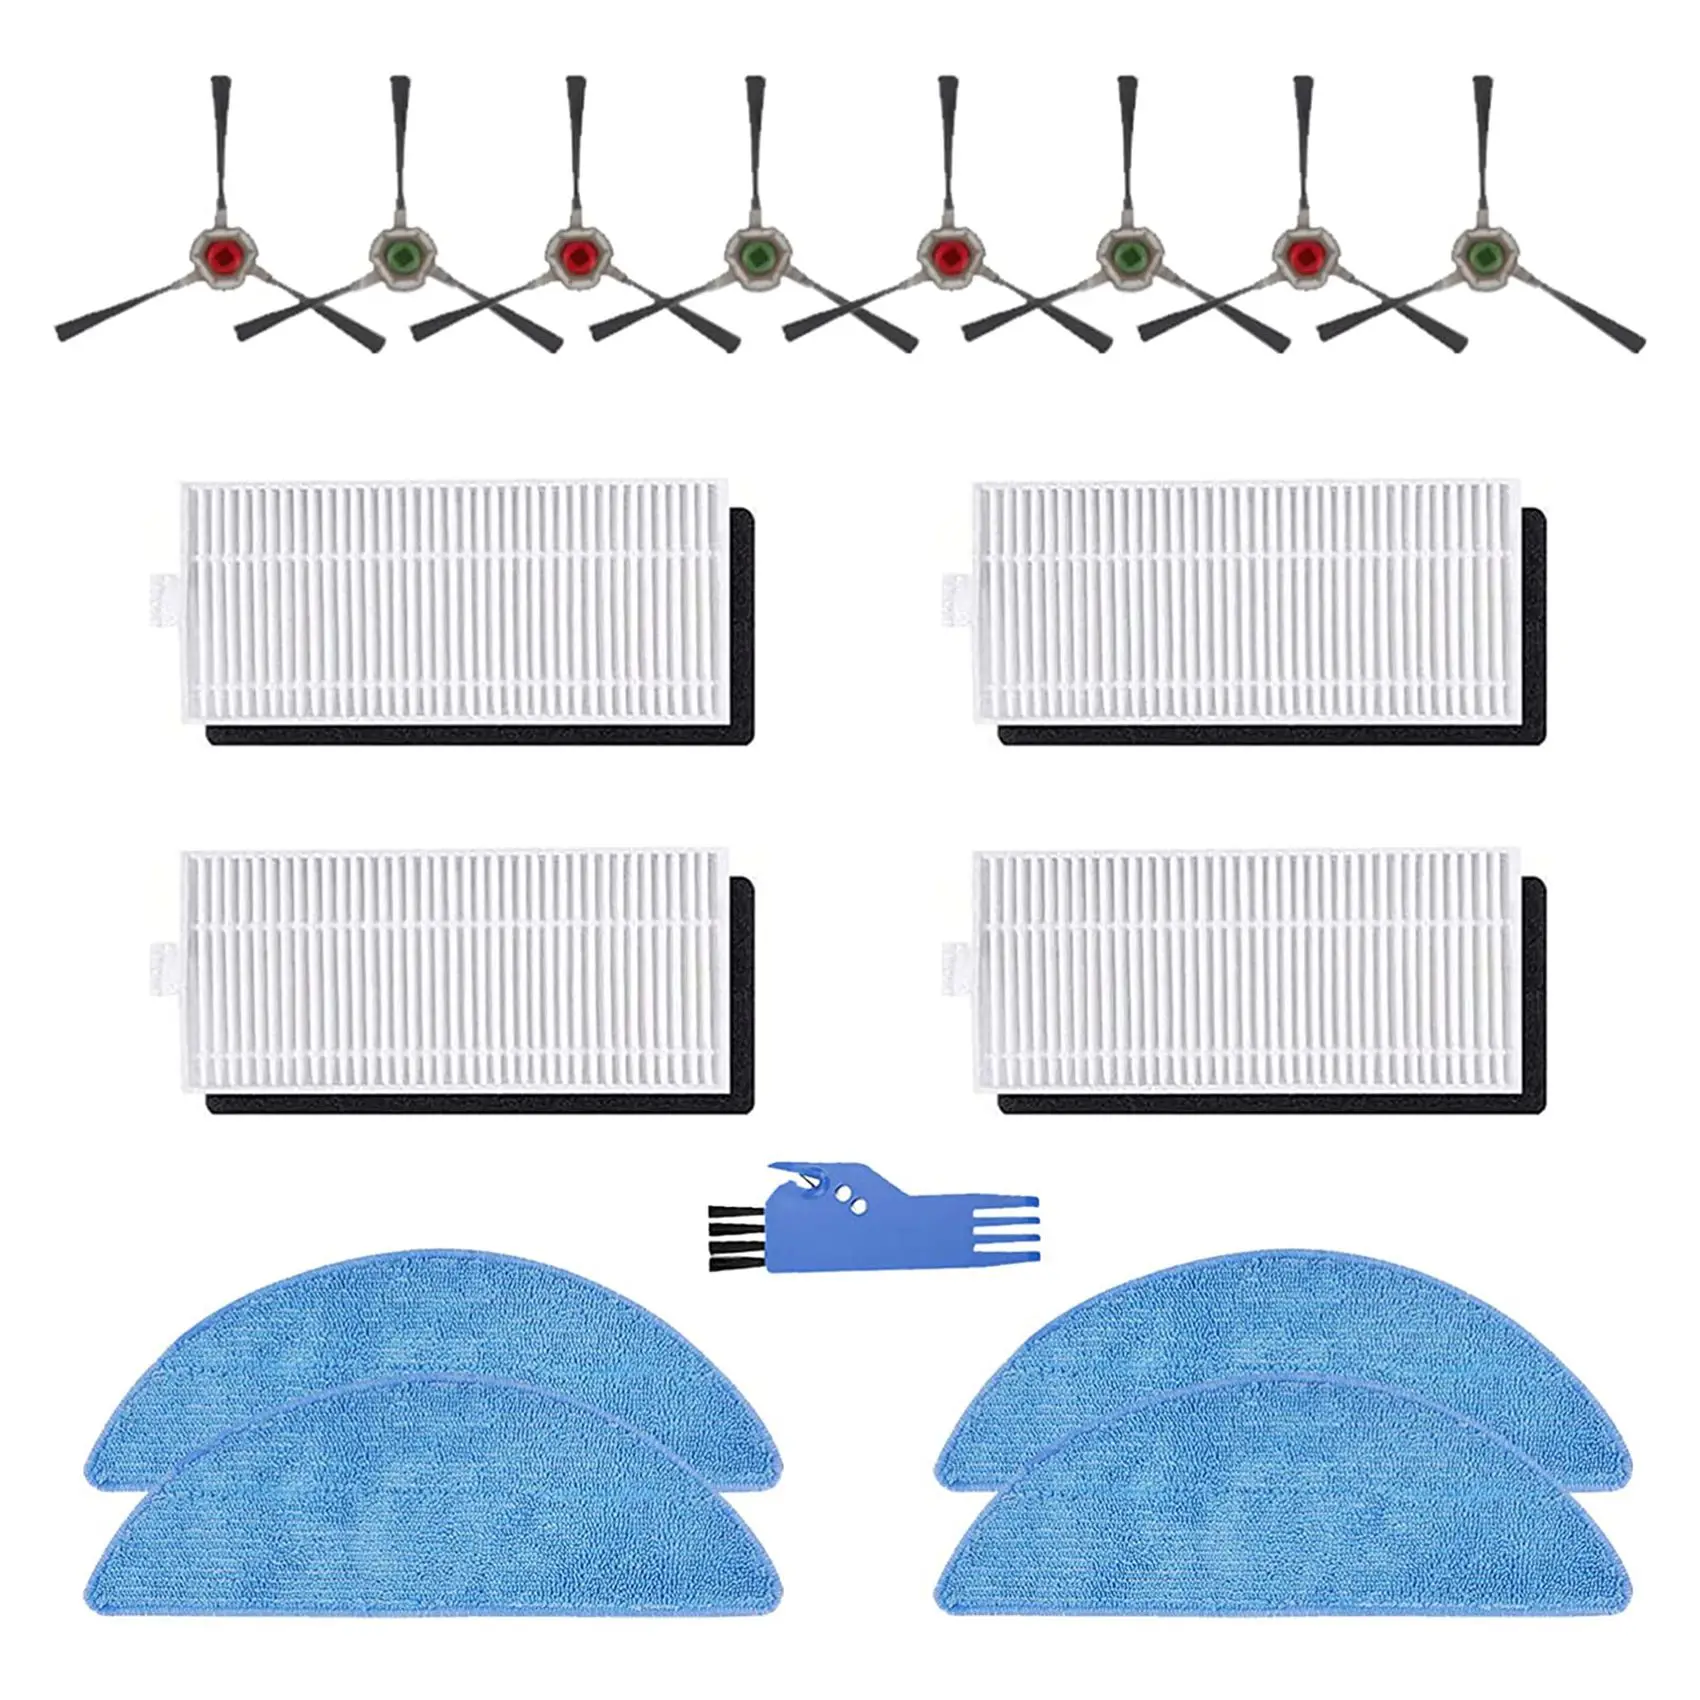 Filter Brush Cloth Replacement Parts Set for Yeedi K650 Robot Vacuum Cleaner Accessories (17 Pieces)